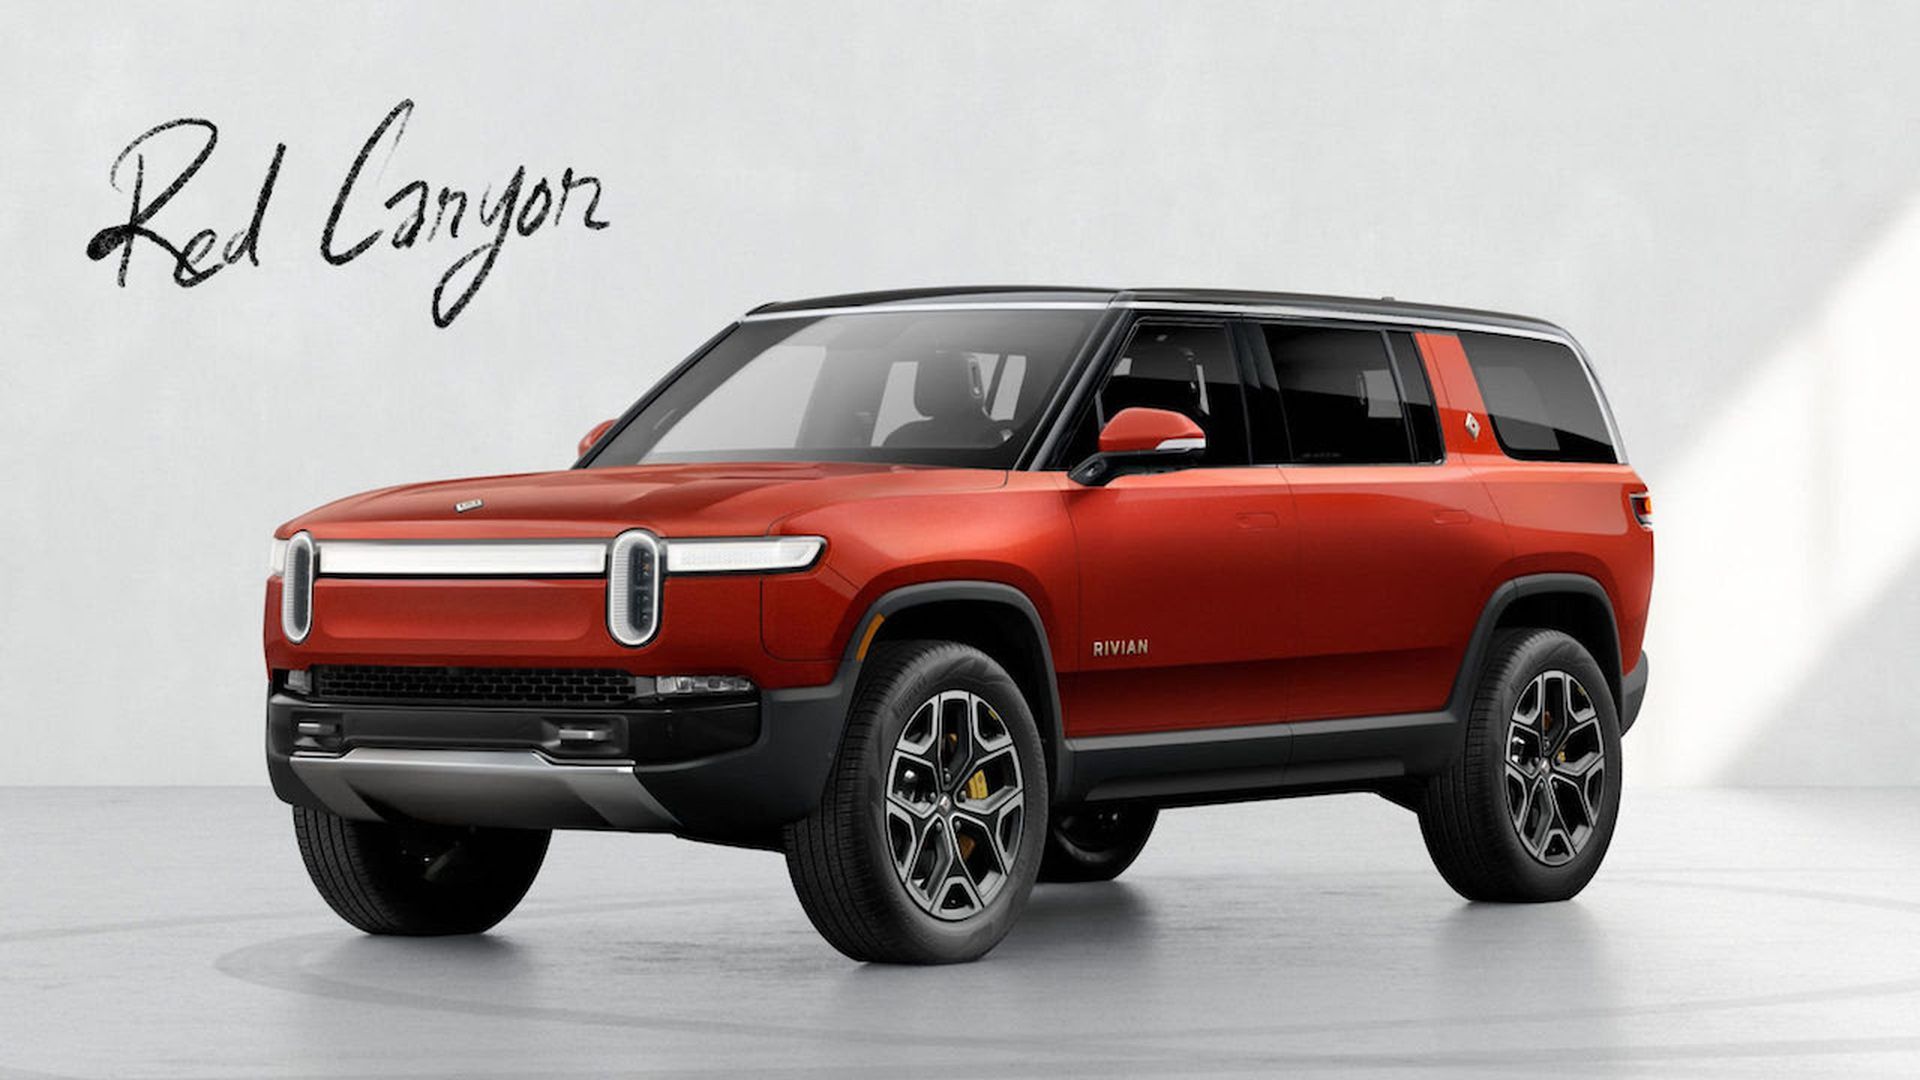 Photo of electric vehicle startup Rivian's SUV